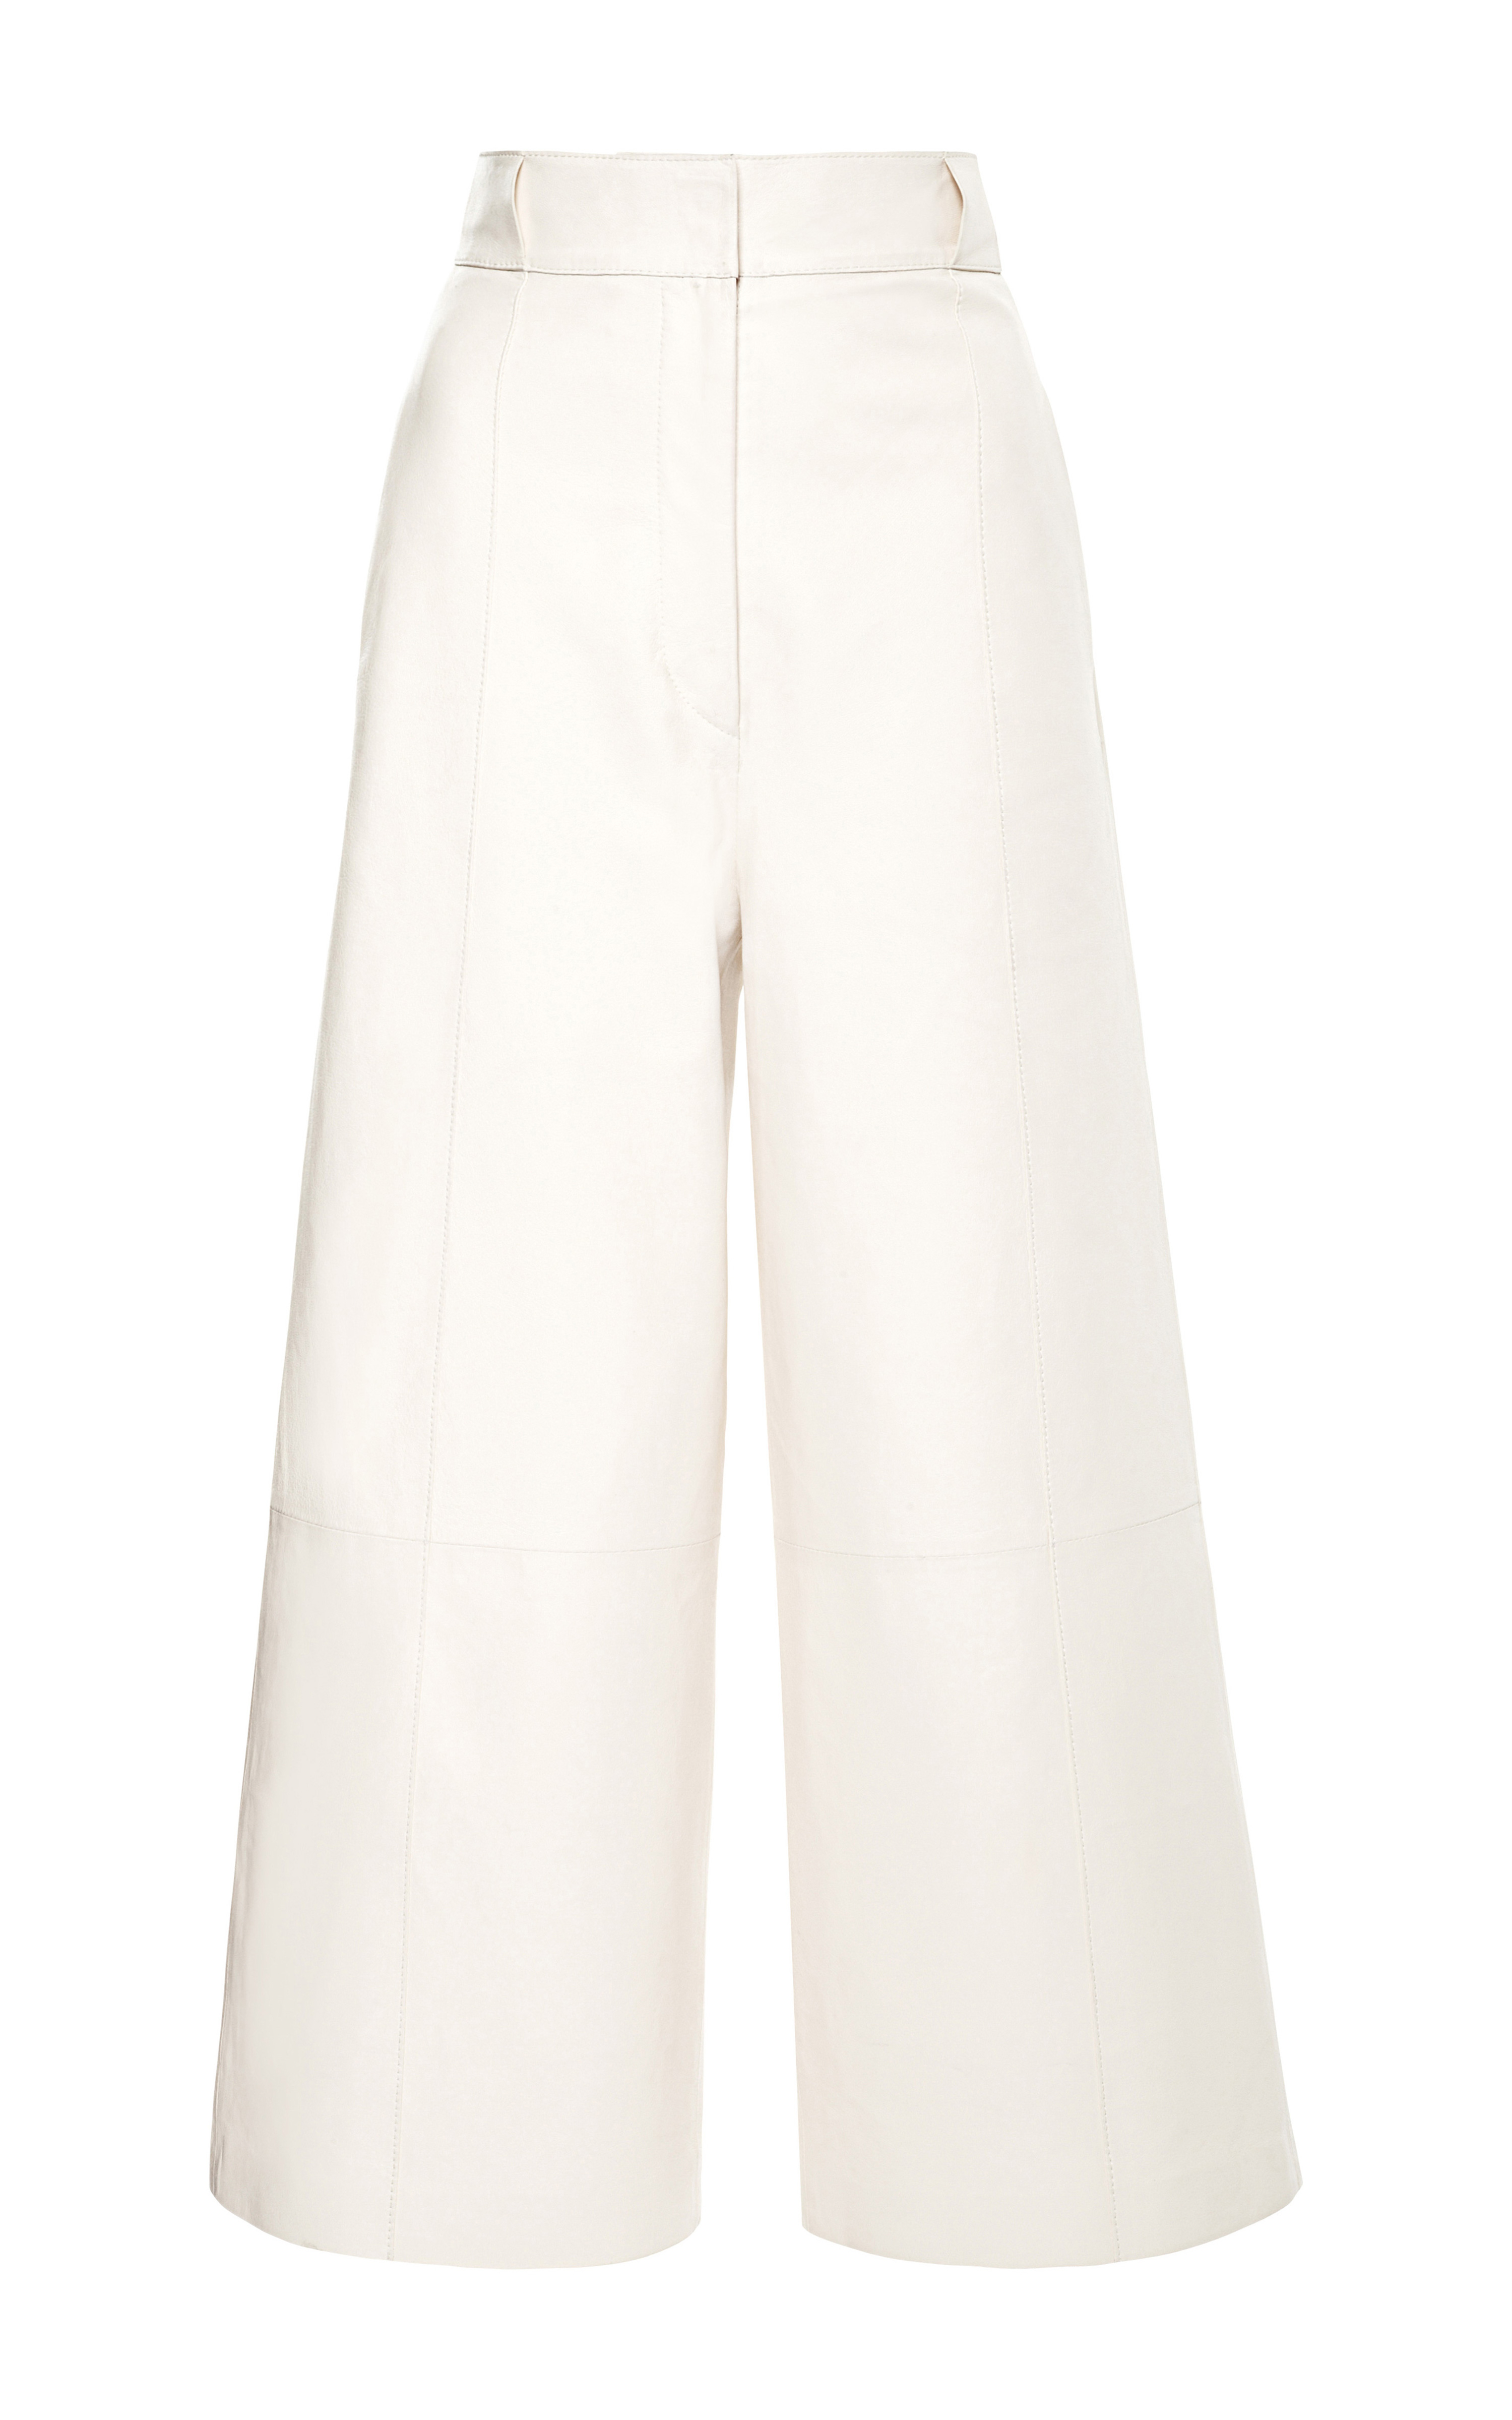 Lyst - Proenza Schouler Plonge Leather High Waist Culottes Pant in White